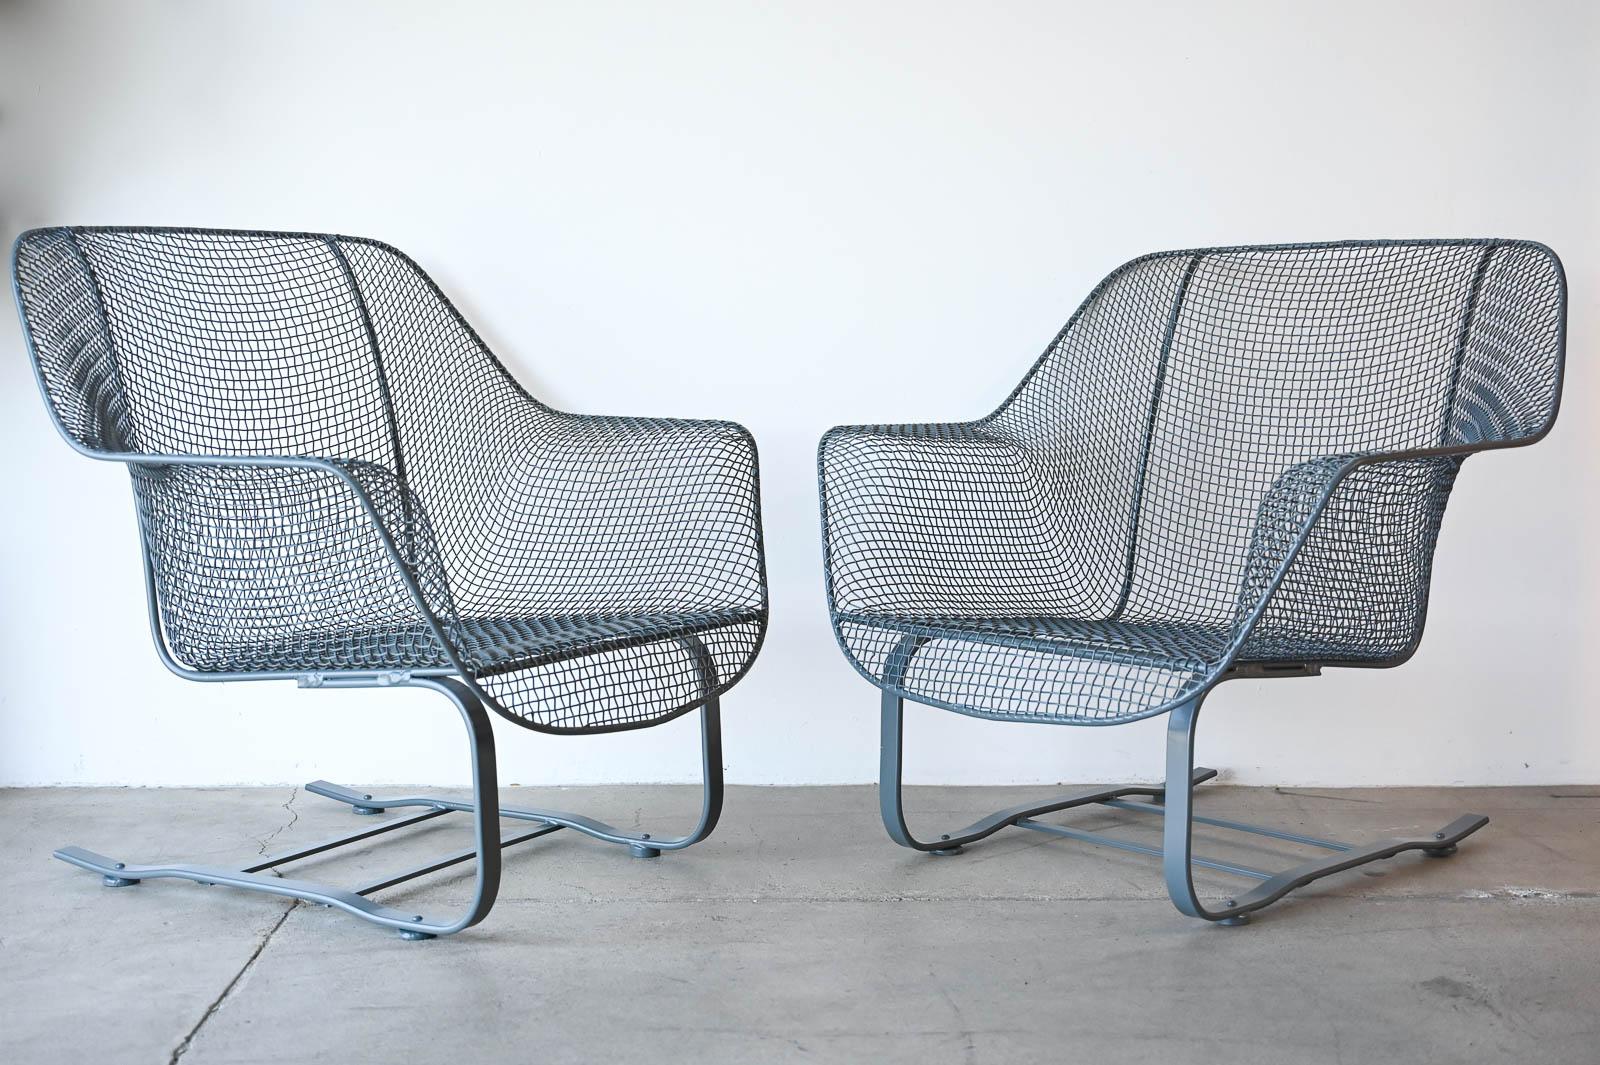 Russell Woodard Sculptura Springer Lounge Chairs, ca. 1950.  Original pair of rare, hard to find lounge chair version of his popular springer design.  Super comfortable, deep seating with cantilevered base.  Professionally restored with new charcoal